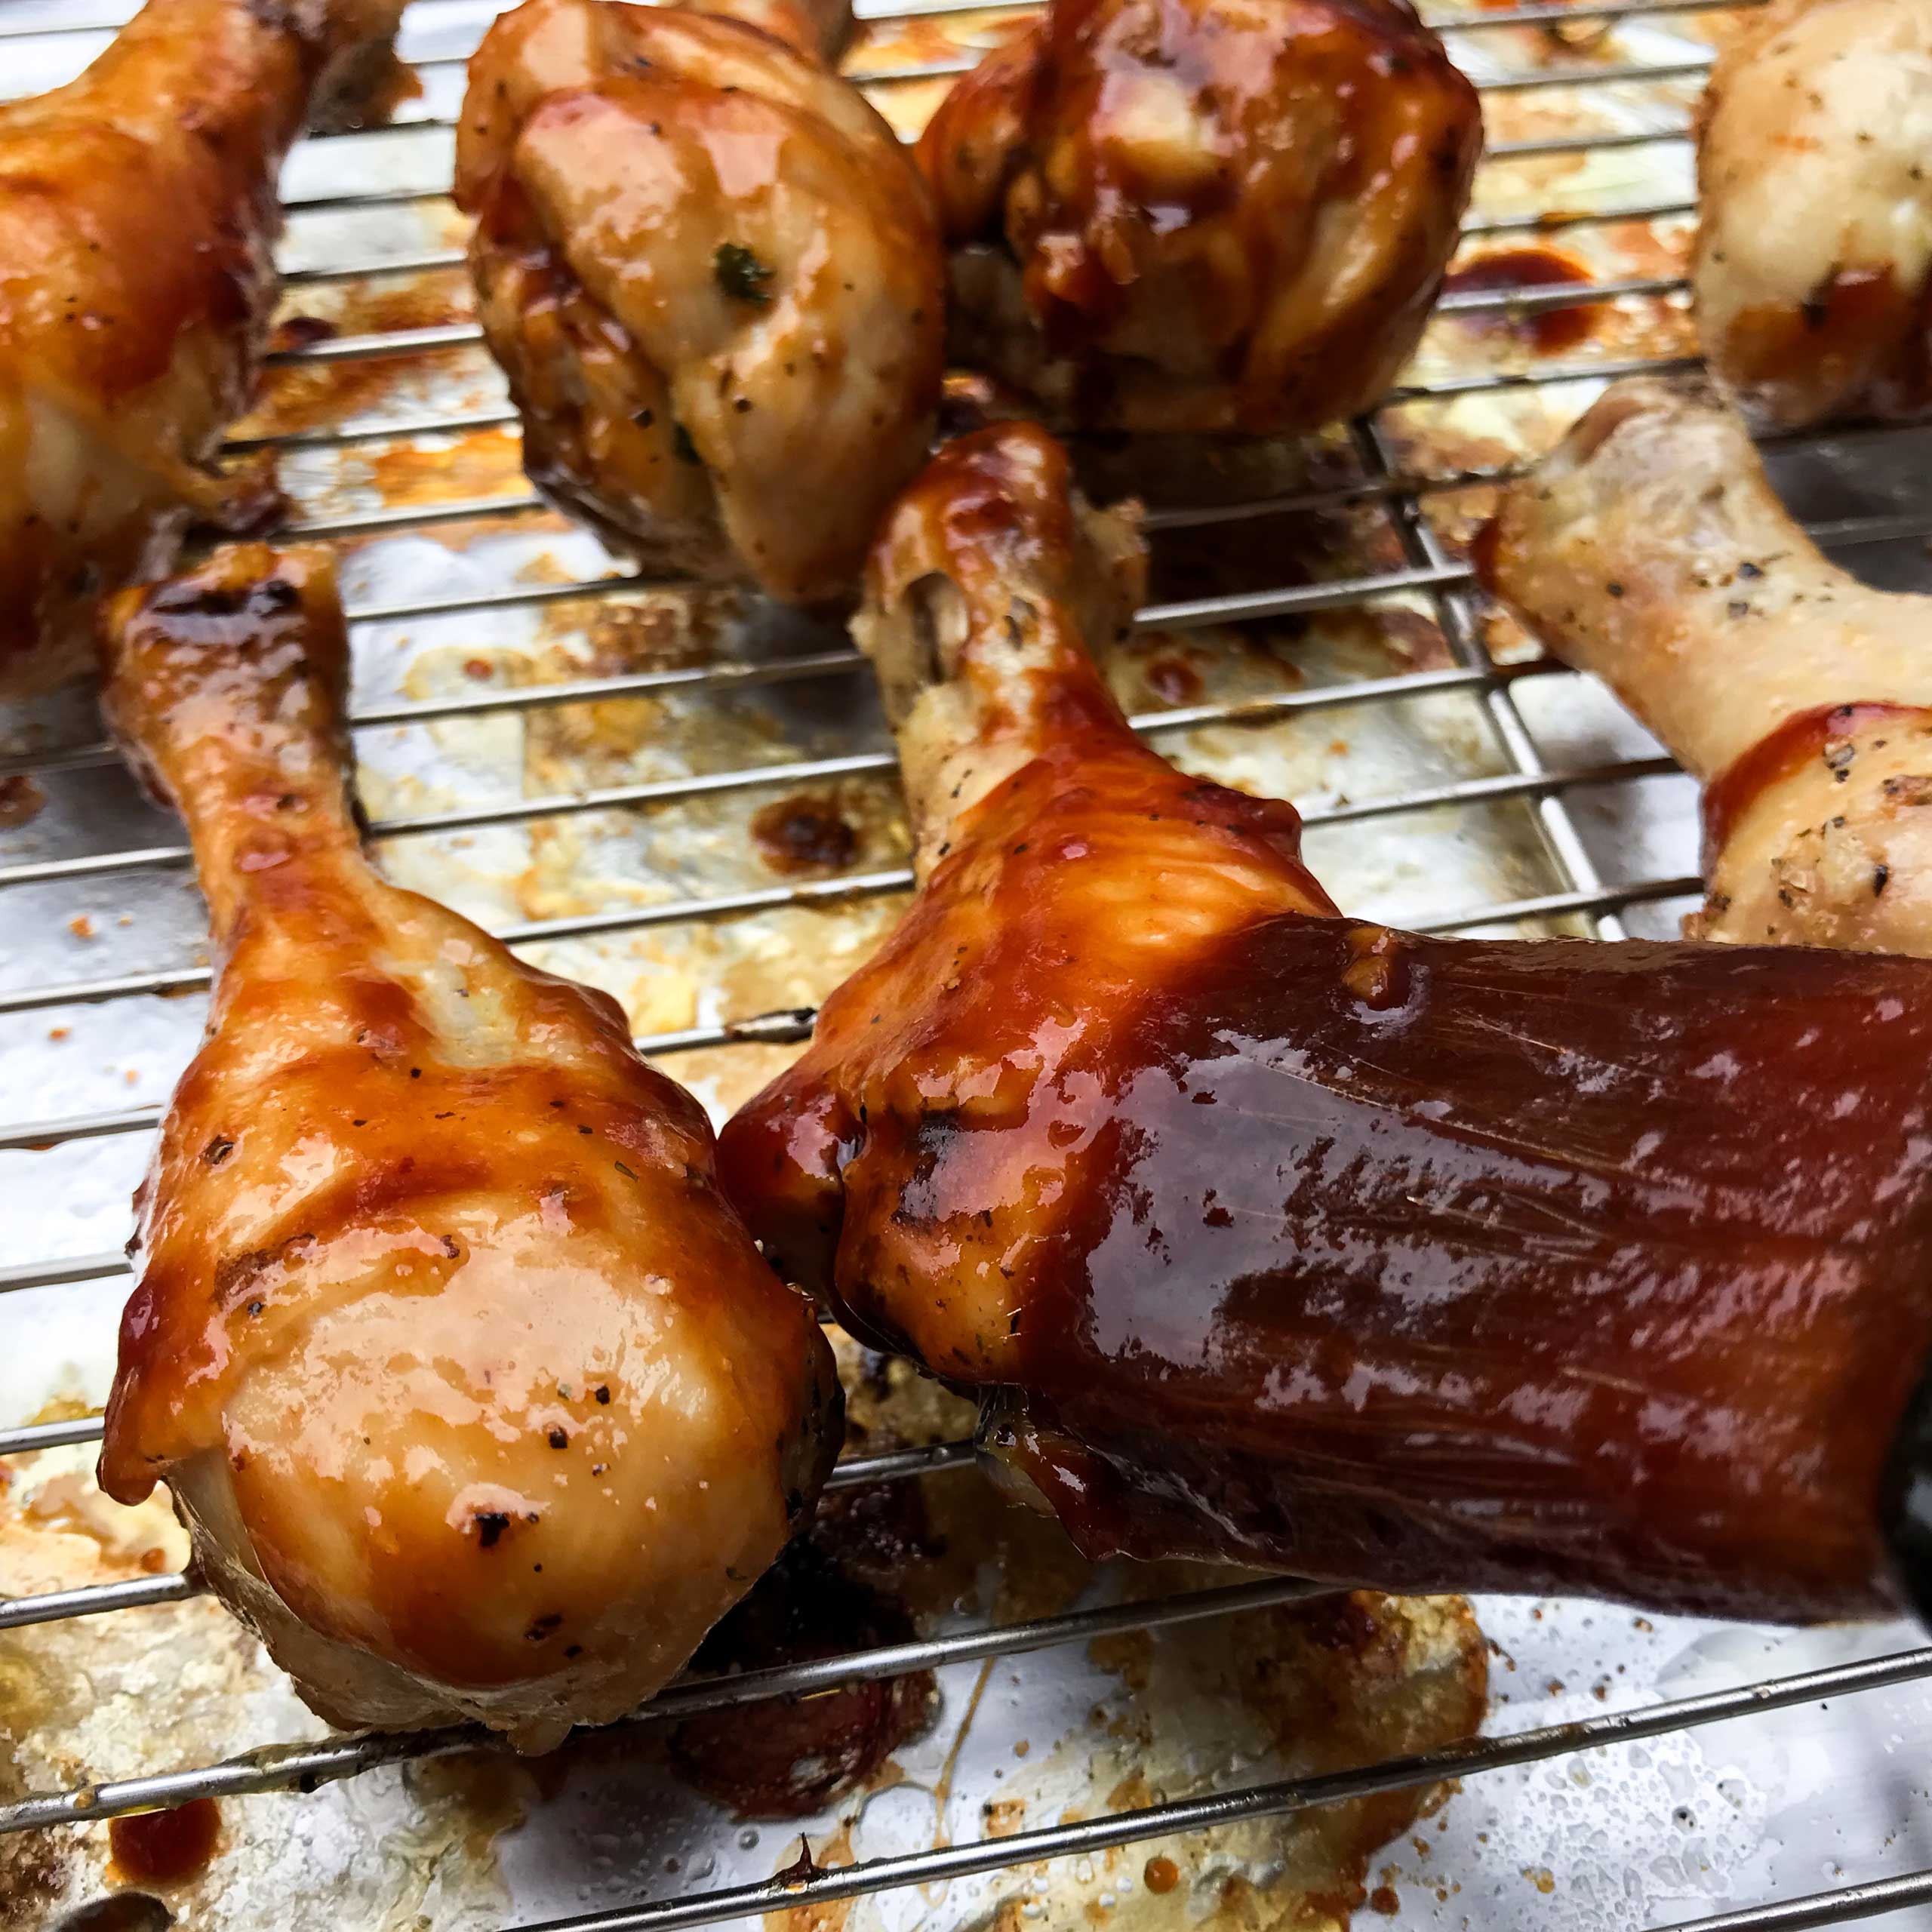 Chicken Drumsticks with Citrus BBQ Sauce | My Curated Tastes